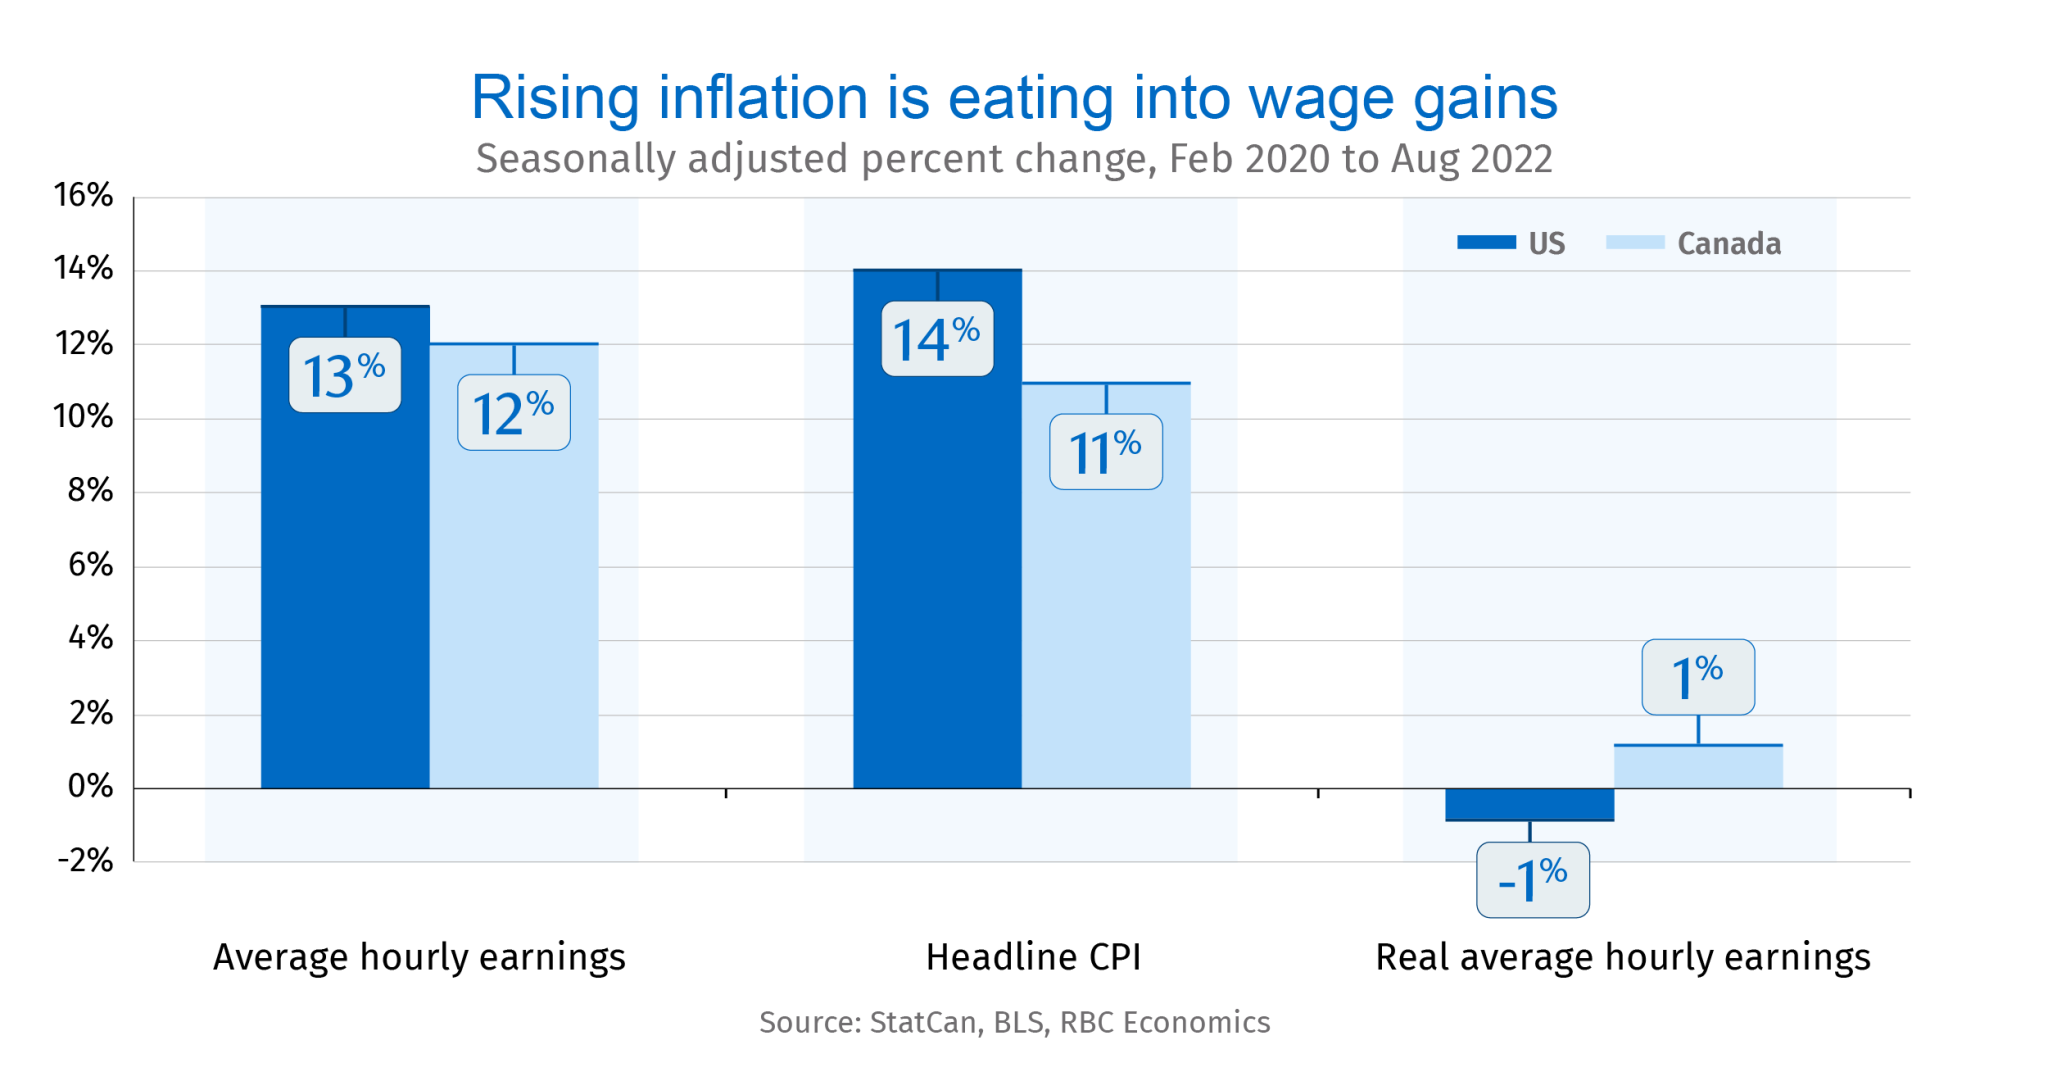 Rising inflation is eating into wage gains. 